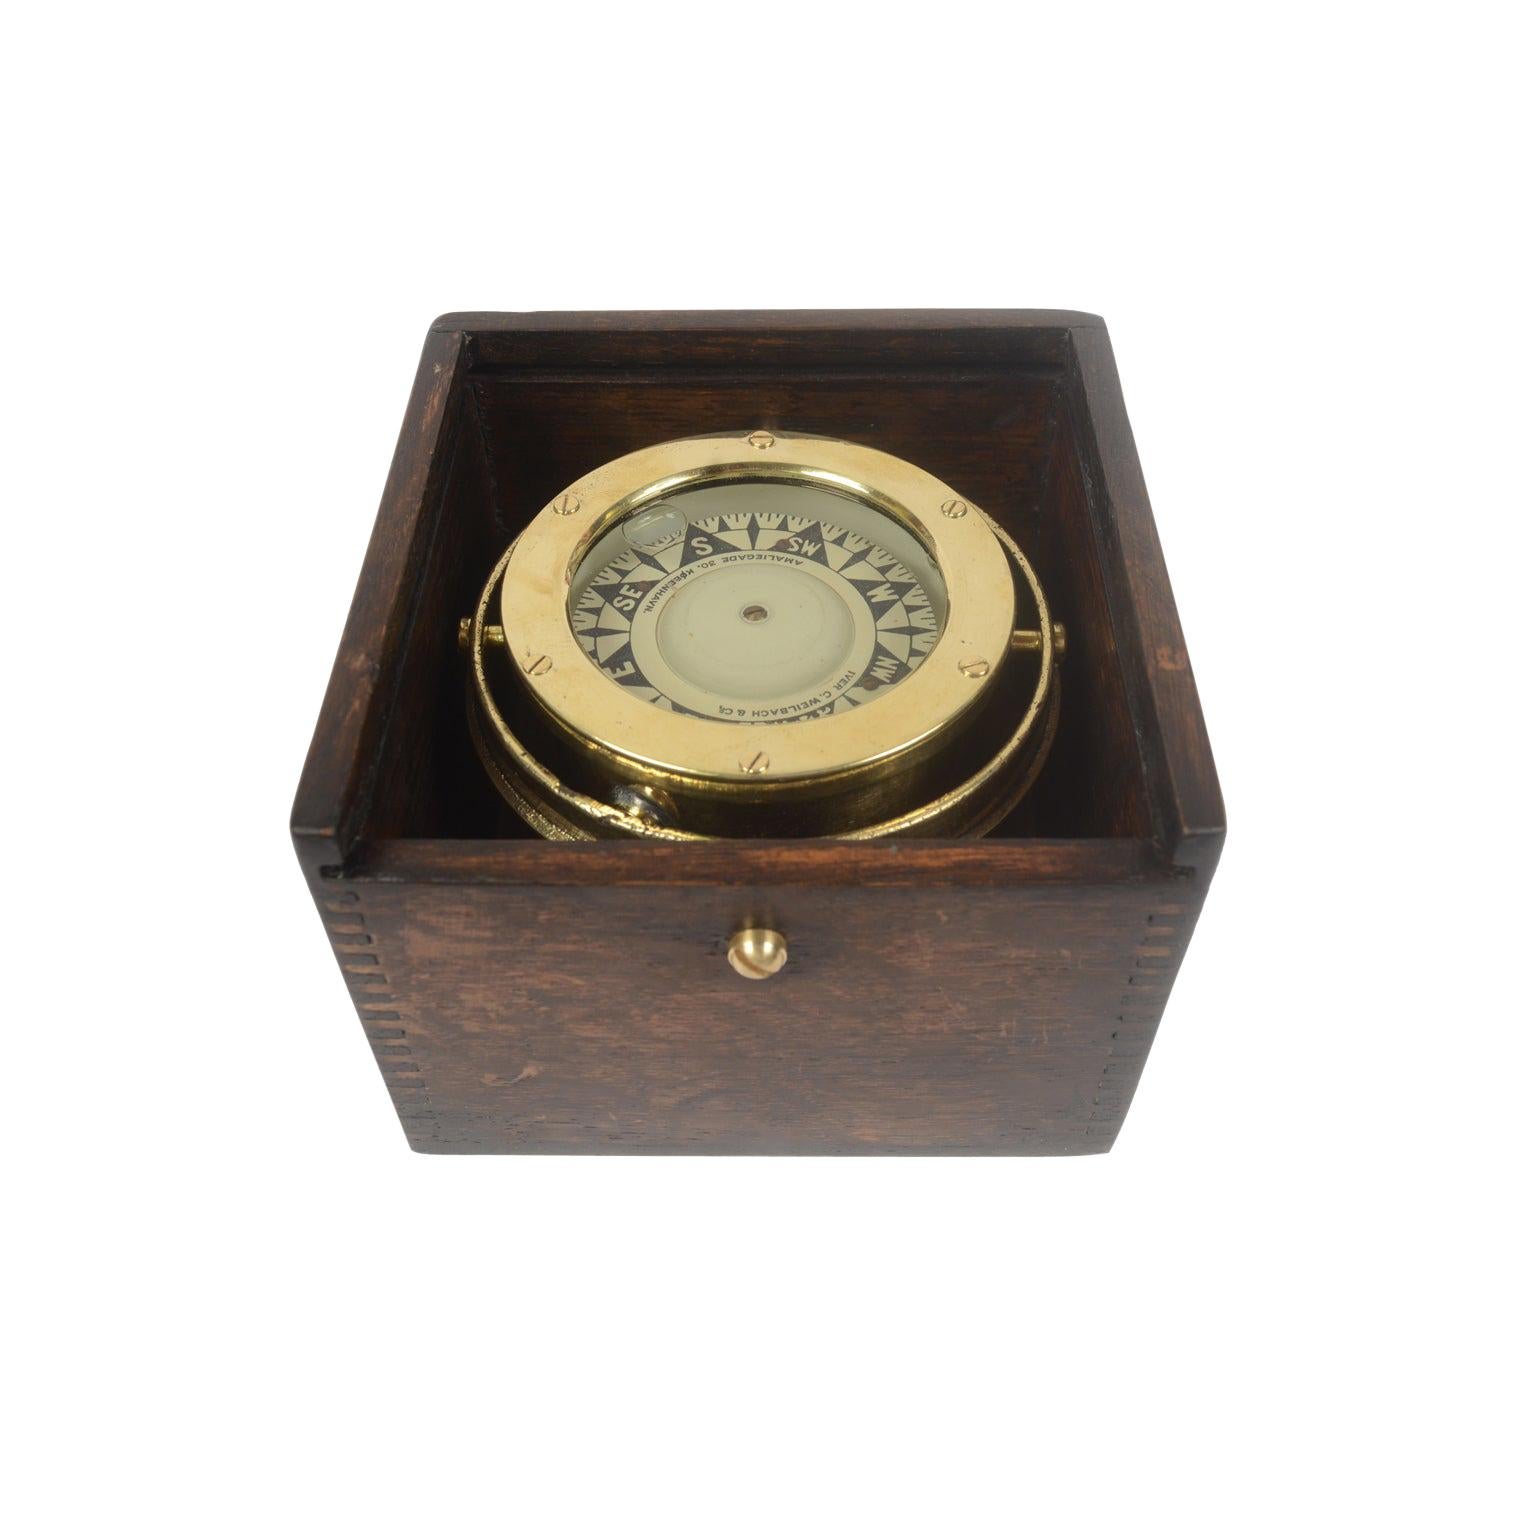 Compass In A Box - 2 For Sale on 1stDibs | antique compass in 